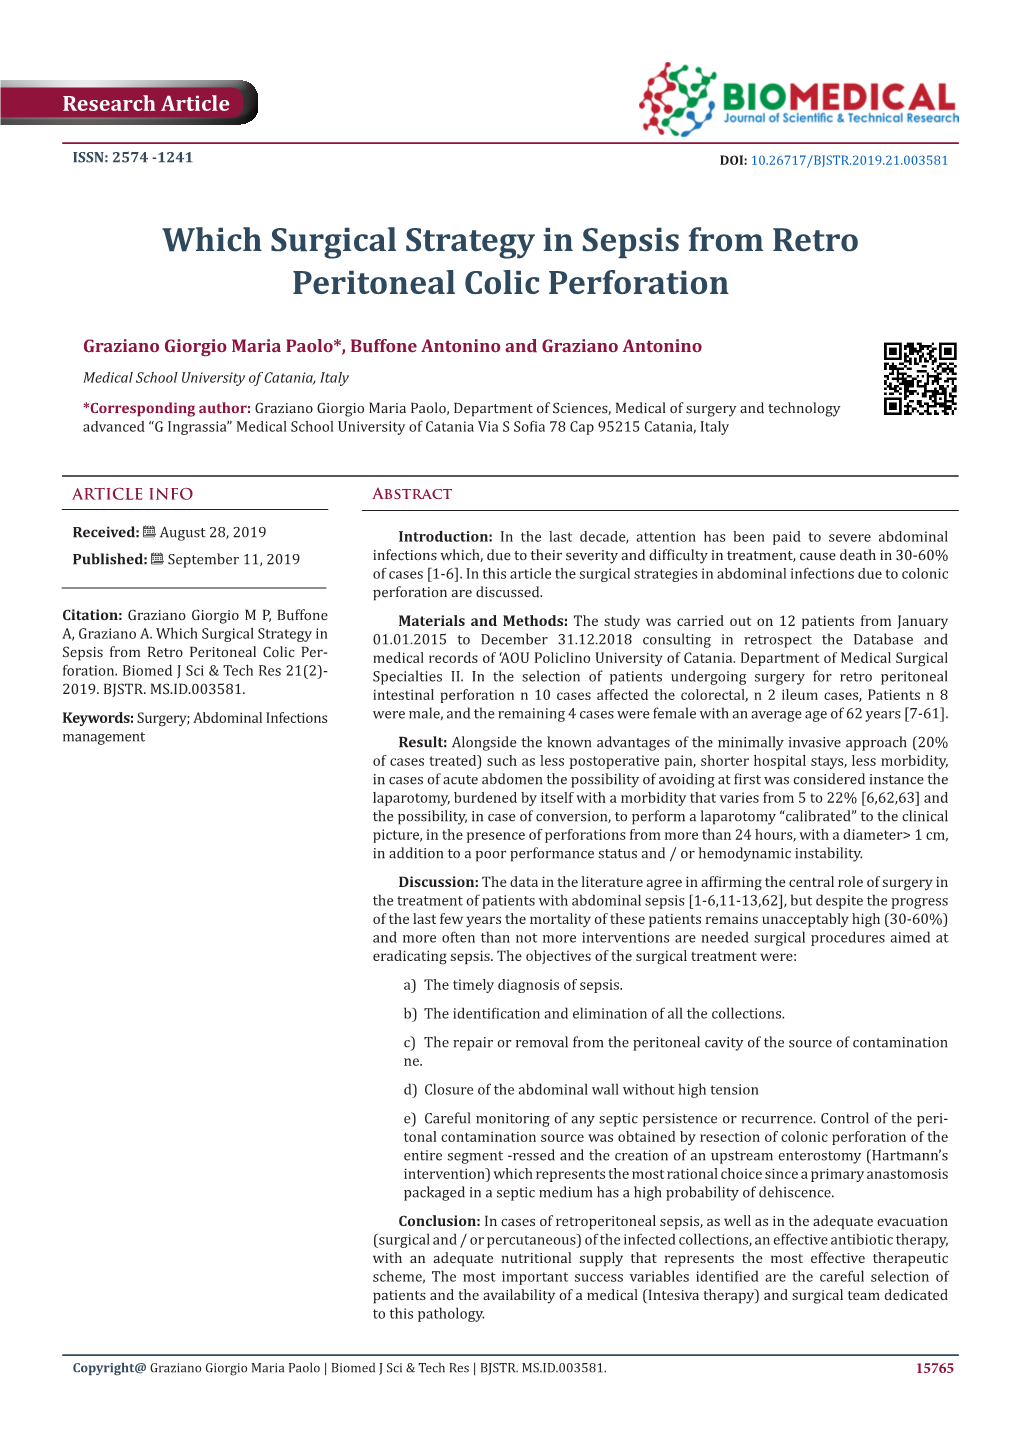 Which Surgical Strategy in Sepsis from Retro Peritoneal Colic Perforation